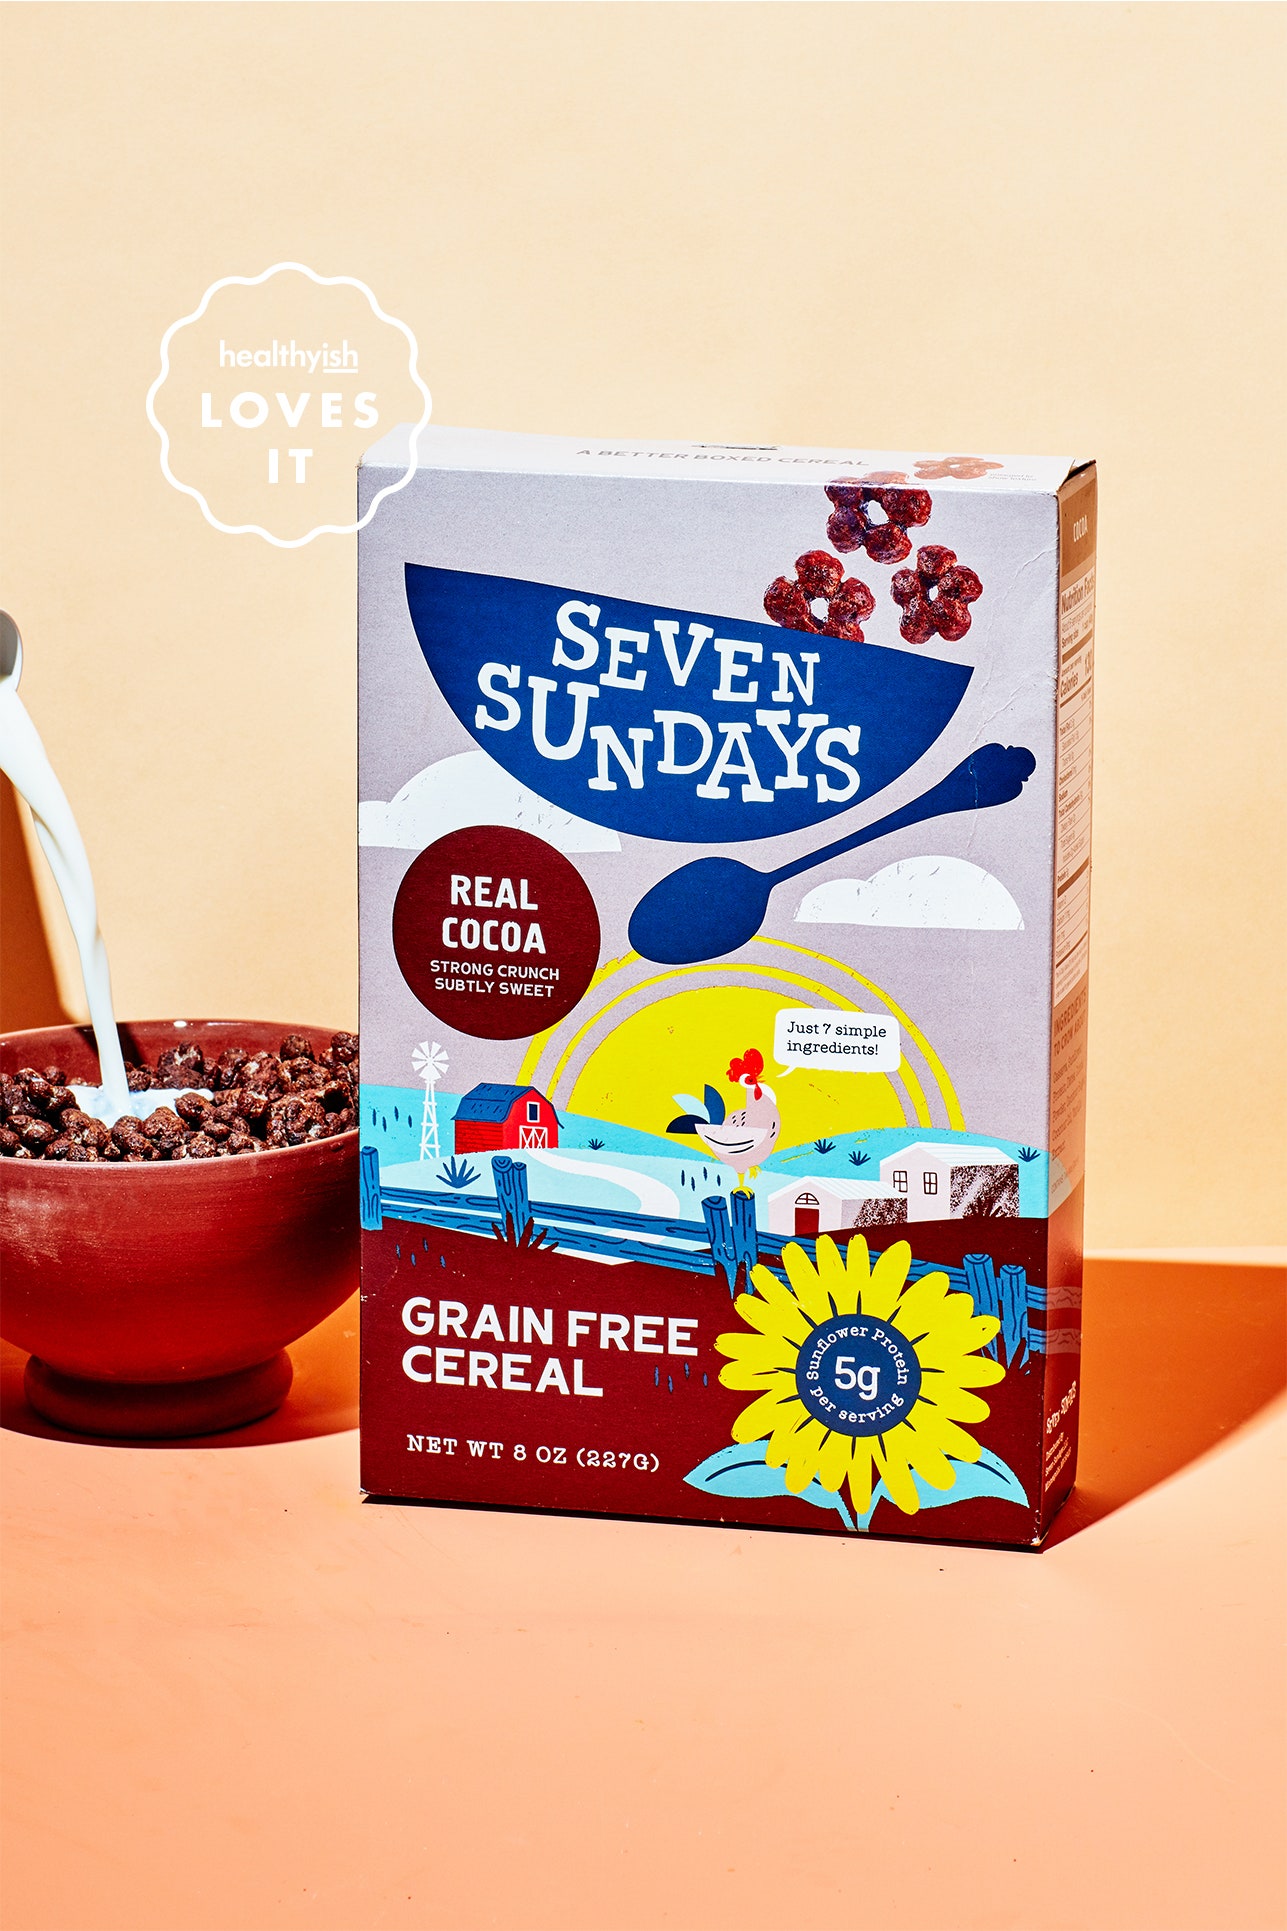 This Chocolate Flavored, Flower-Formed Cereal Is All I Need for Breakfast